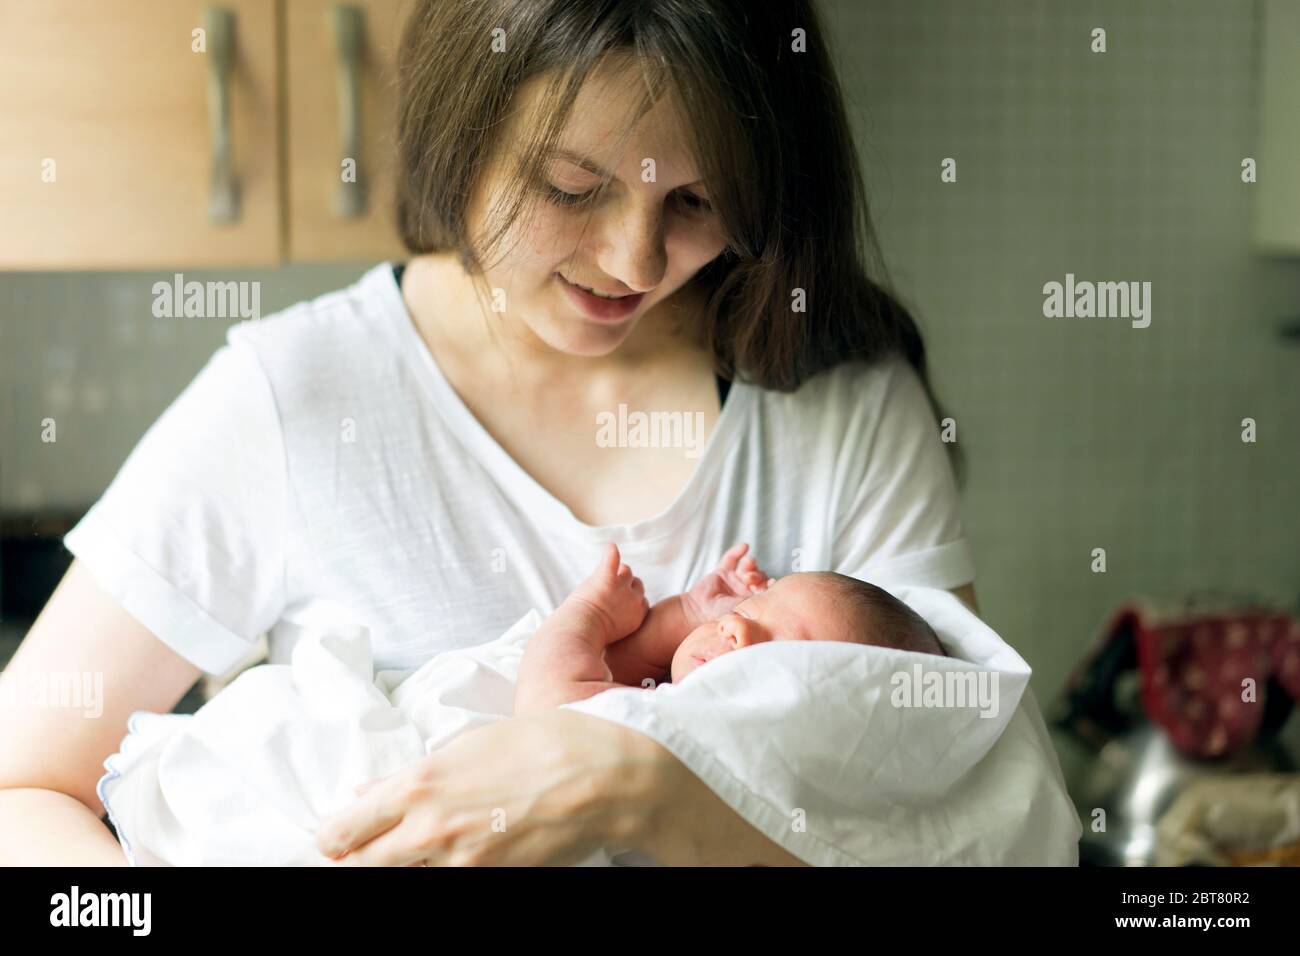 A mother with a newborn baby boy in her arms is breastfeeding him in the kitchen Stock Photo